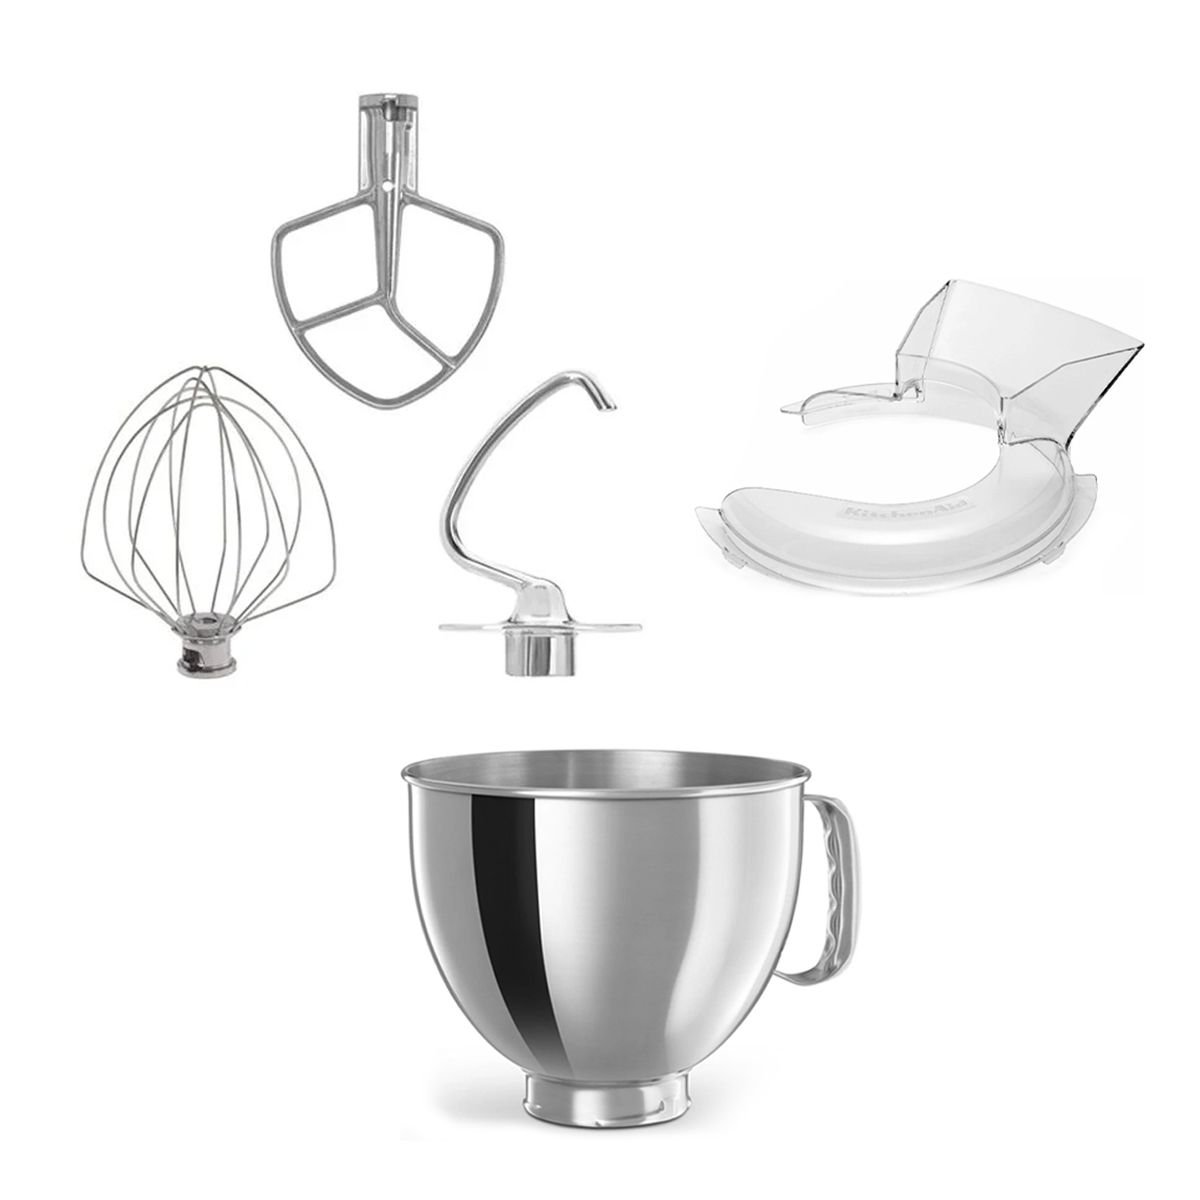 5 Qt. Stainless Steel Bowl + Pouring Shield + Flex Edge Accessory Pack, KitchenAid